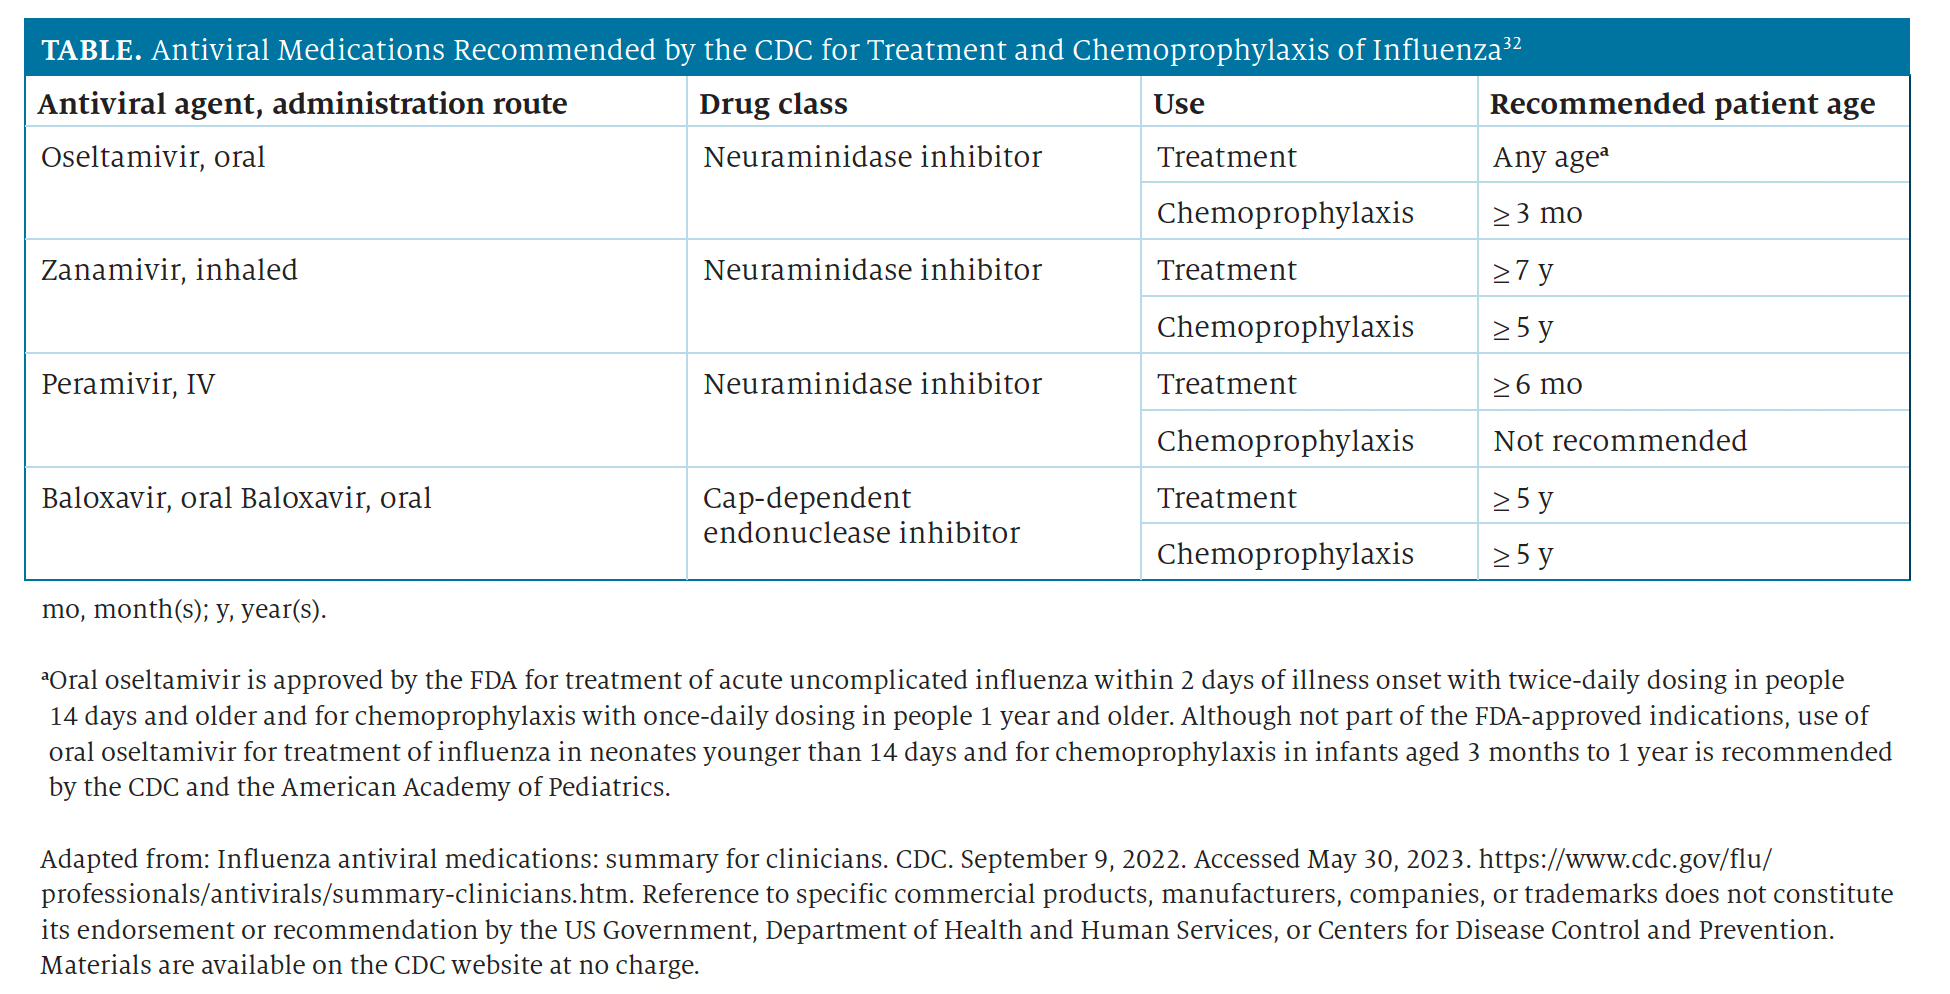 Antiviral Medications Recommended by the CDC for Treatment and Chemoprophylaxis of Influenza